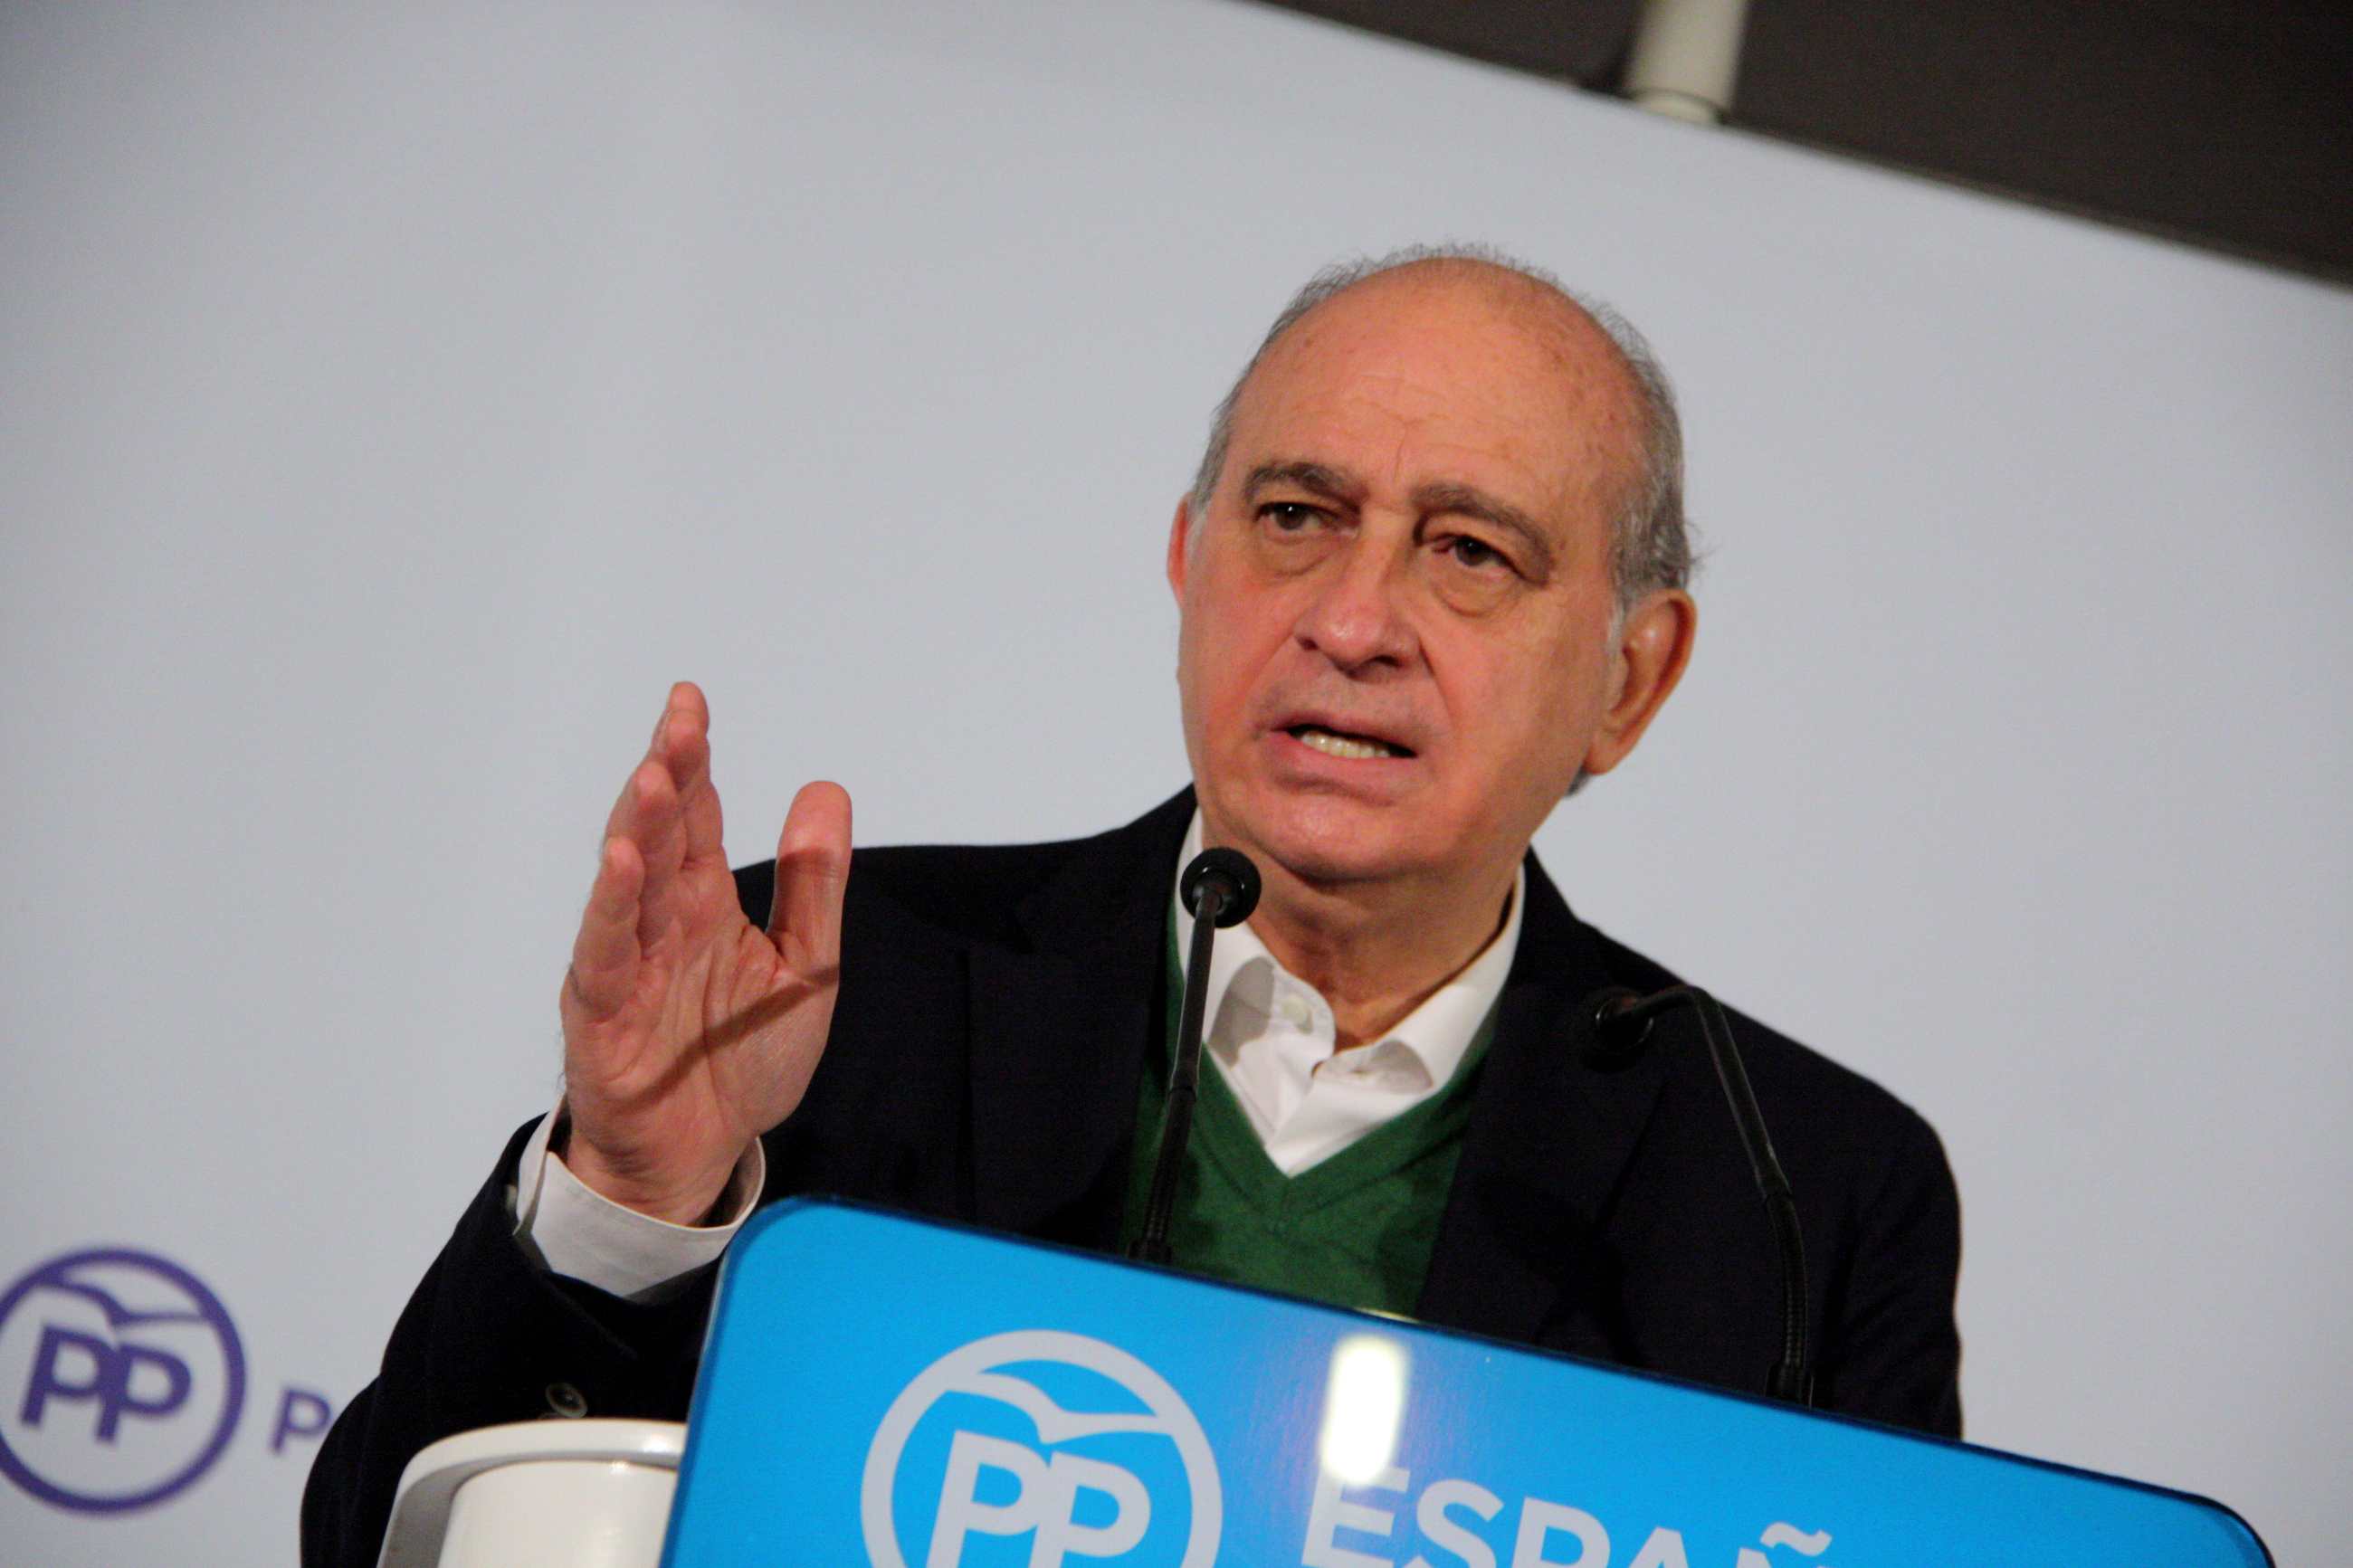 Image of PPC’s candidate for Barcelona Jorge Fernández Díaz (by ACN)